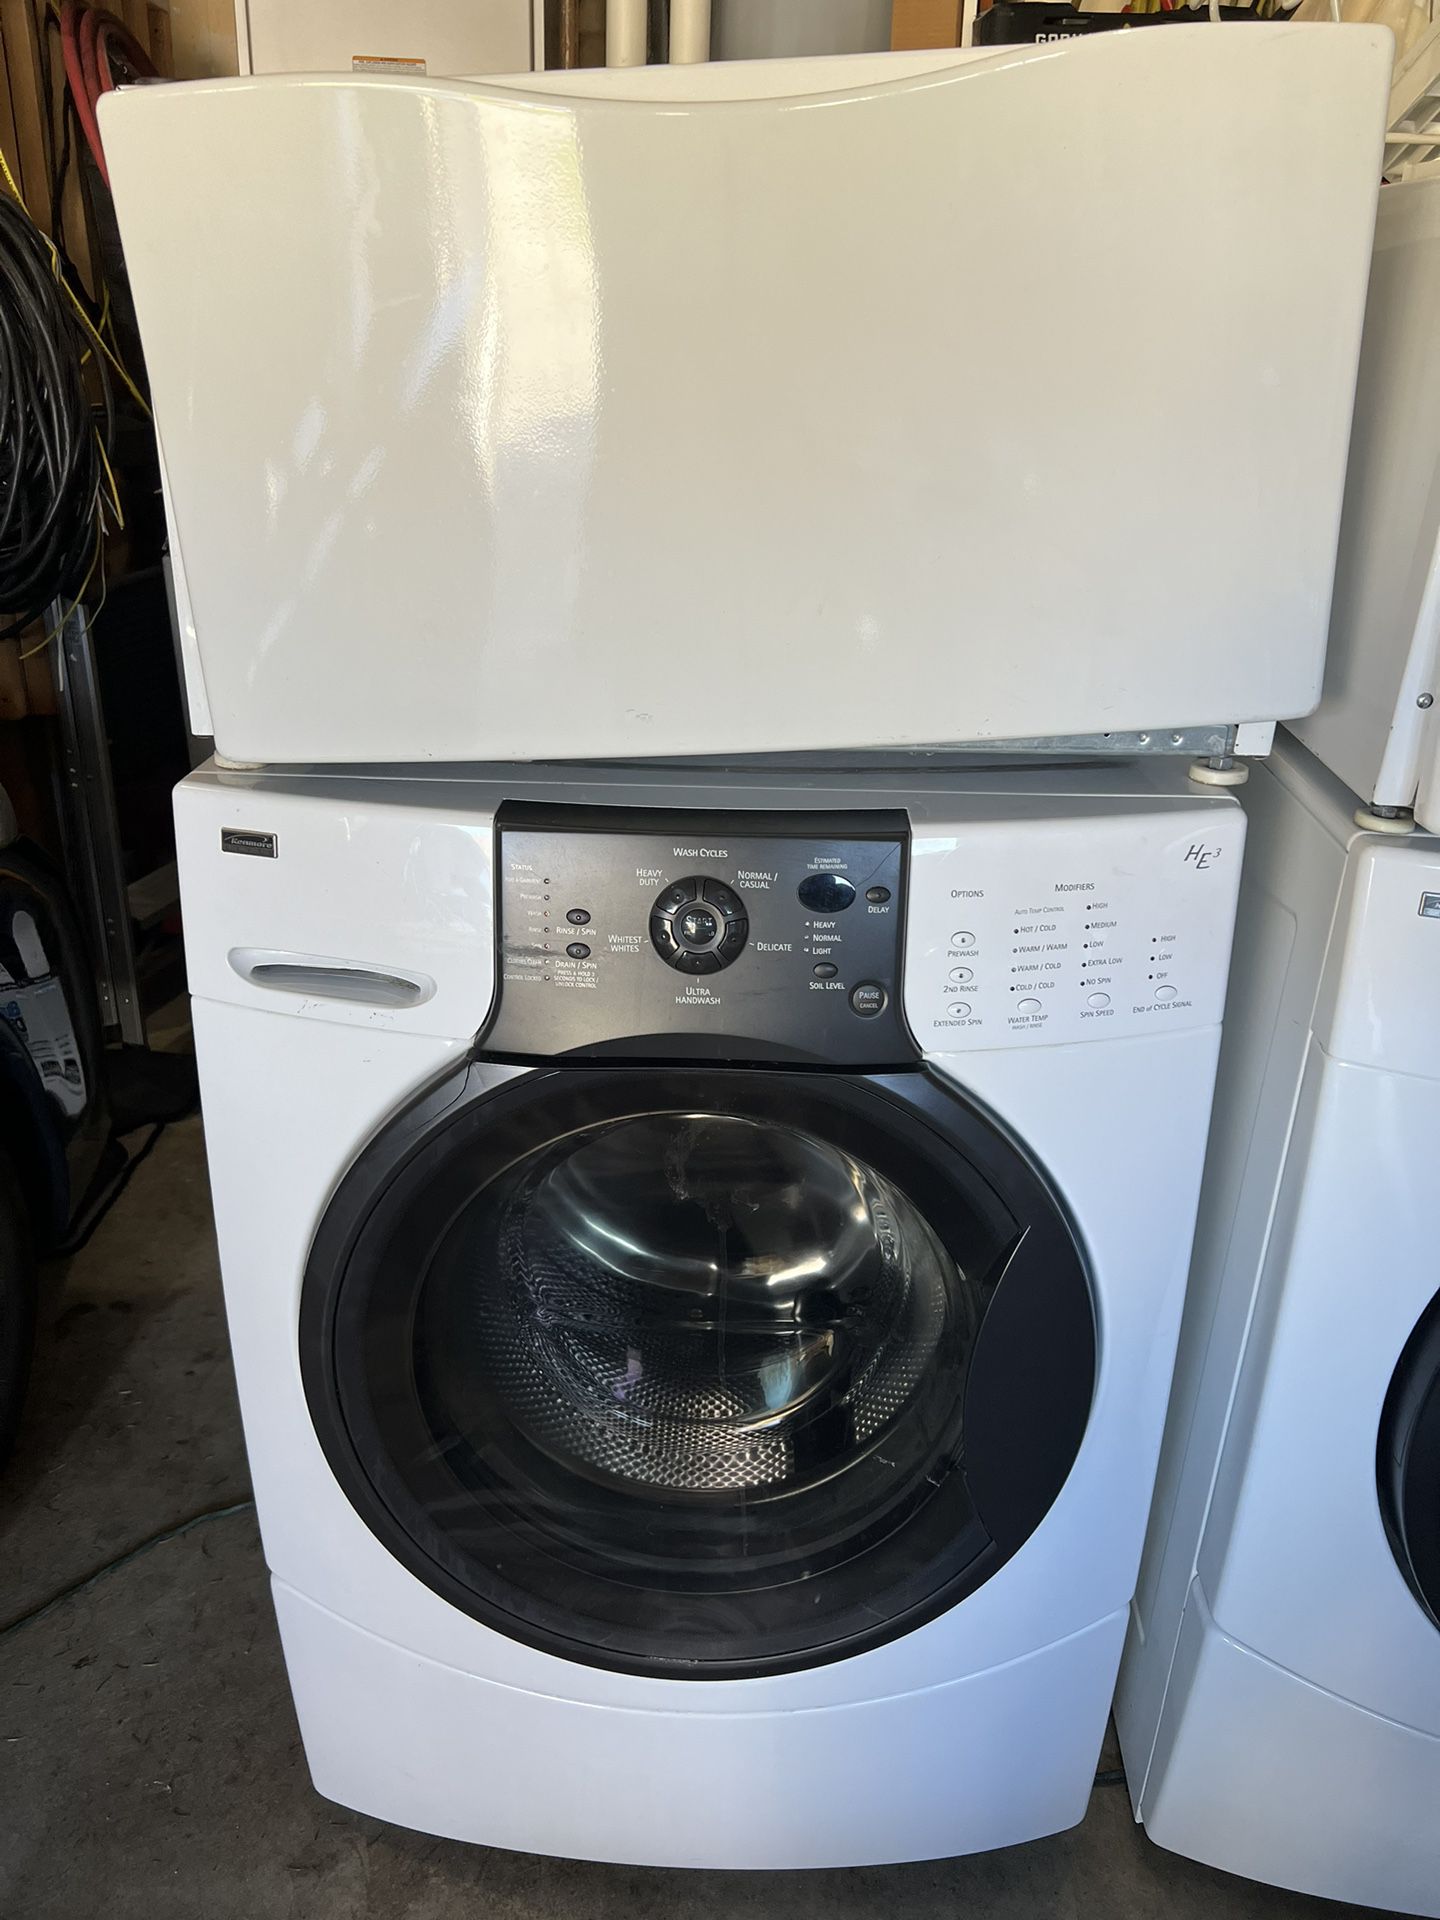 For Sale Washer and Dryer Kenmore Elite 